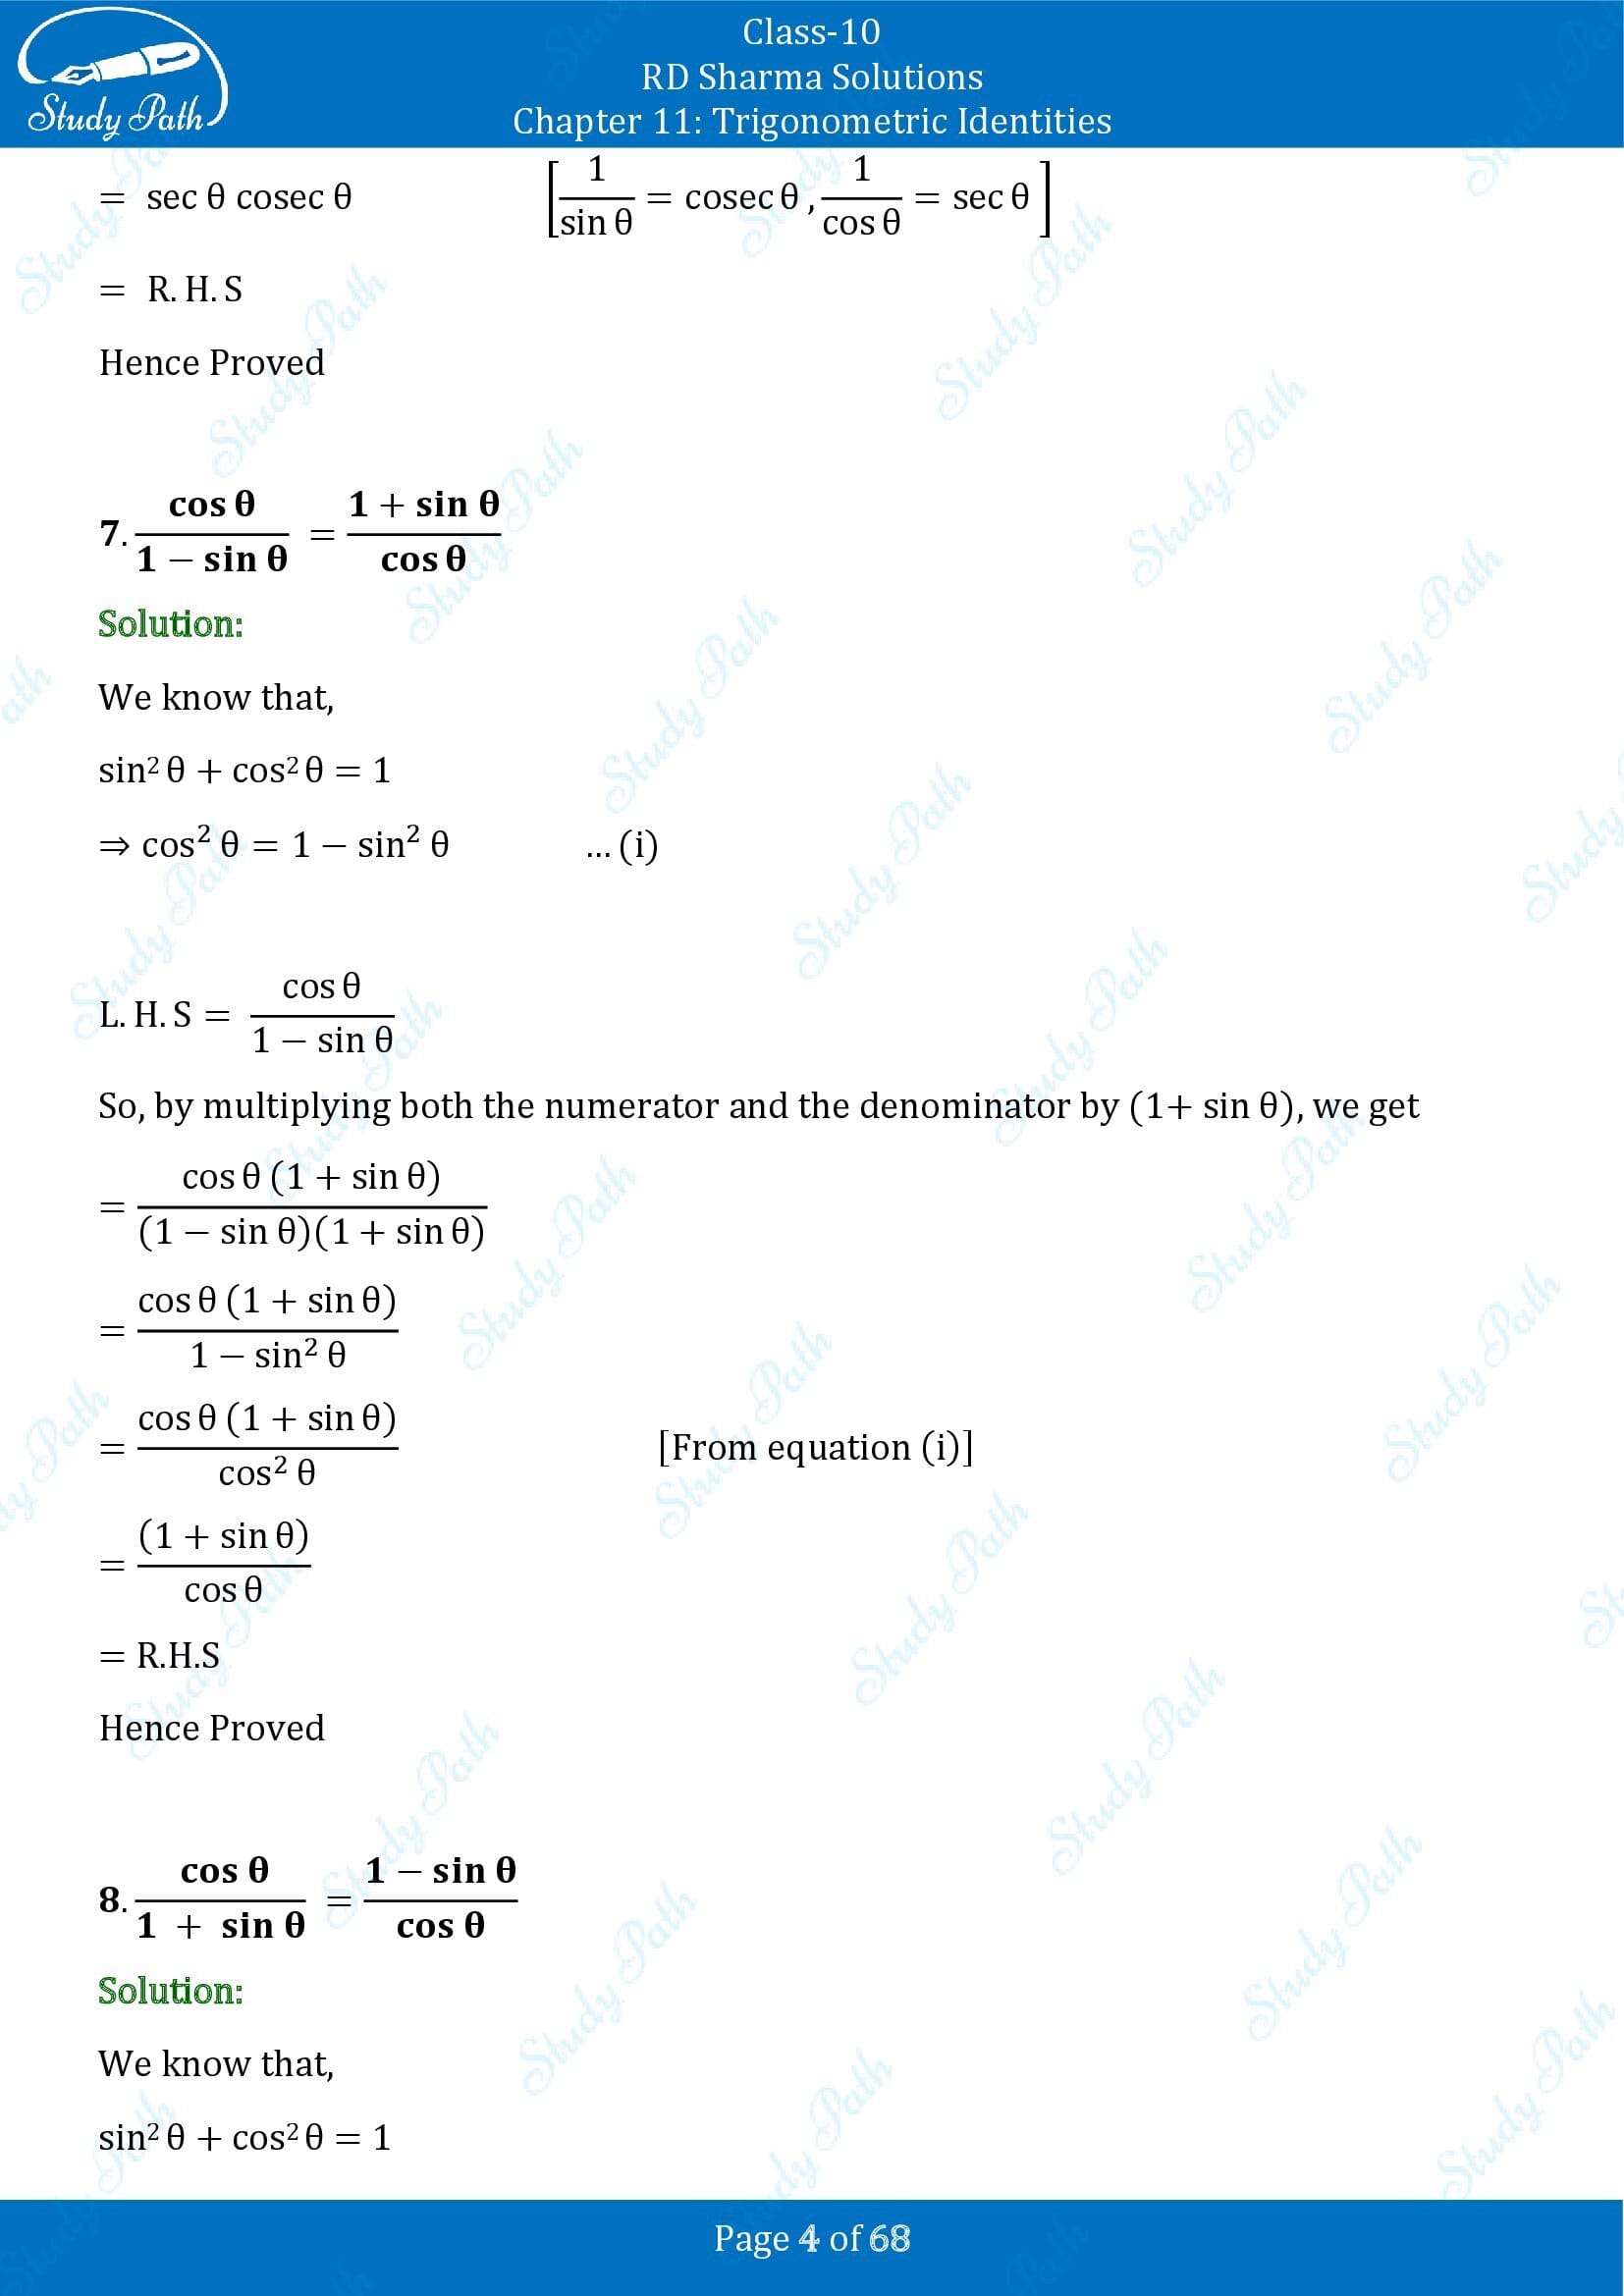 RD Sharma Solutions Class 10 Chapter 11 Trigonometric Identities Exercise 11.1 00004